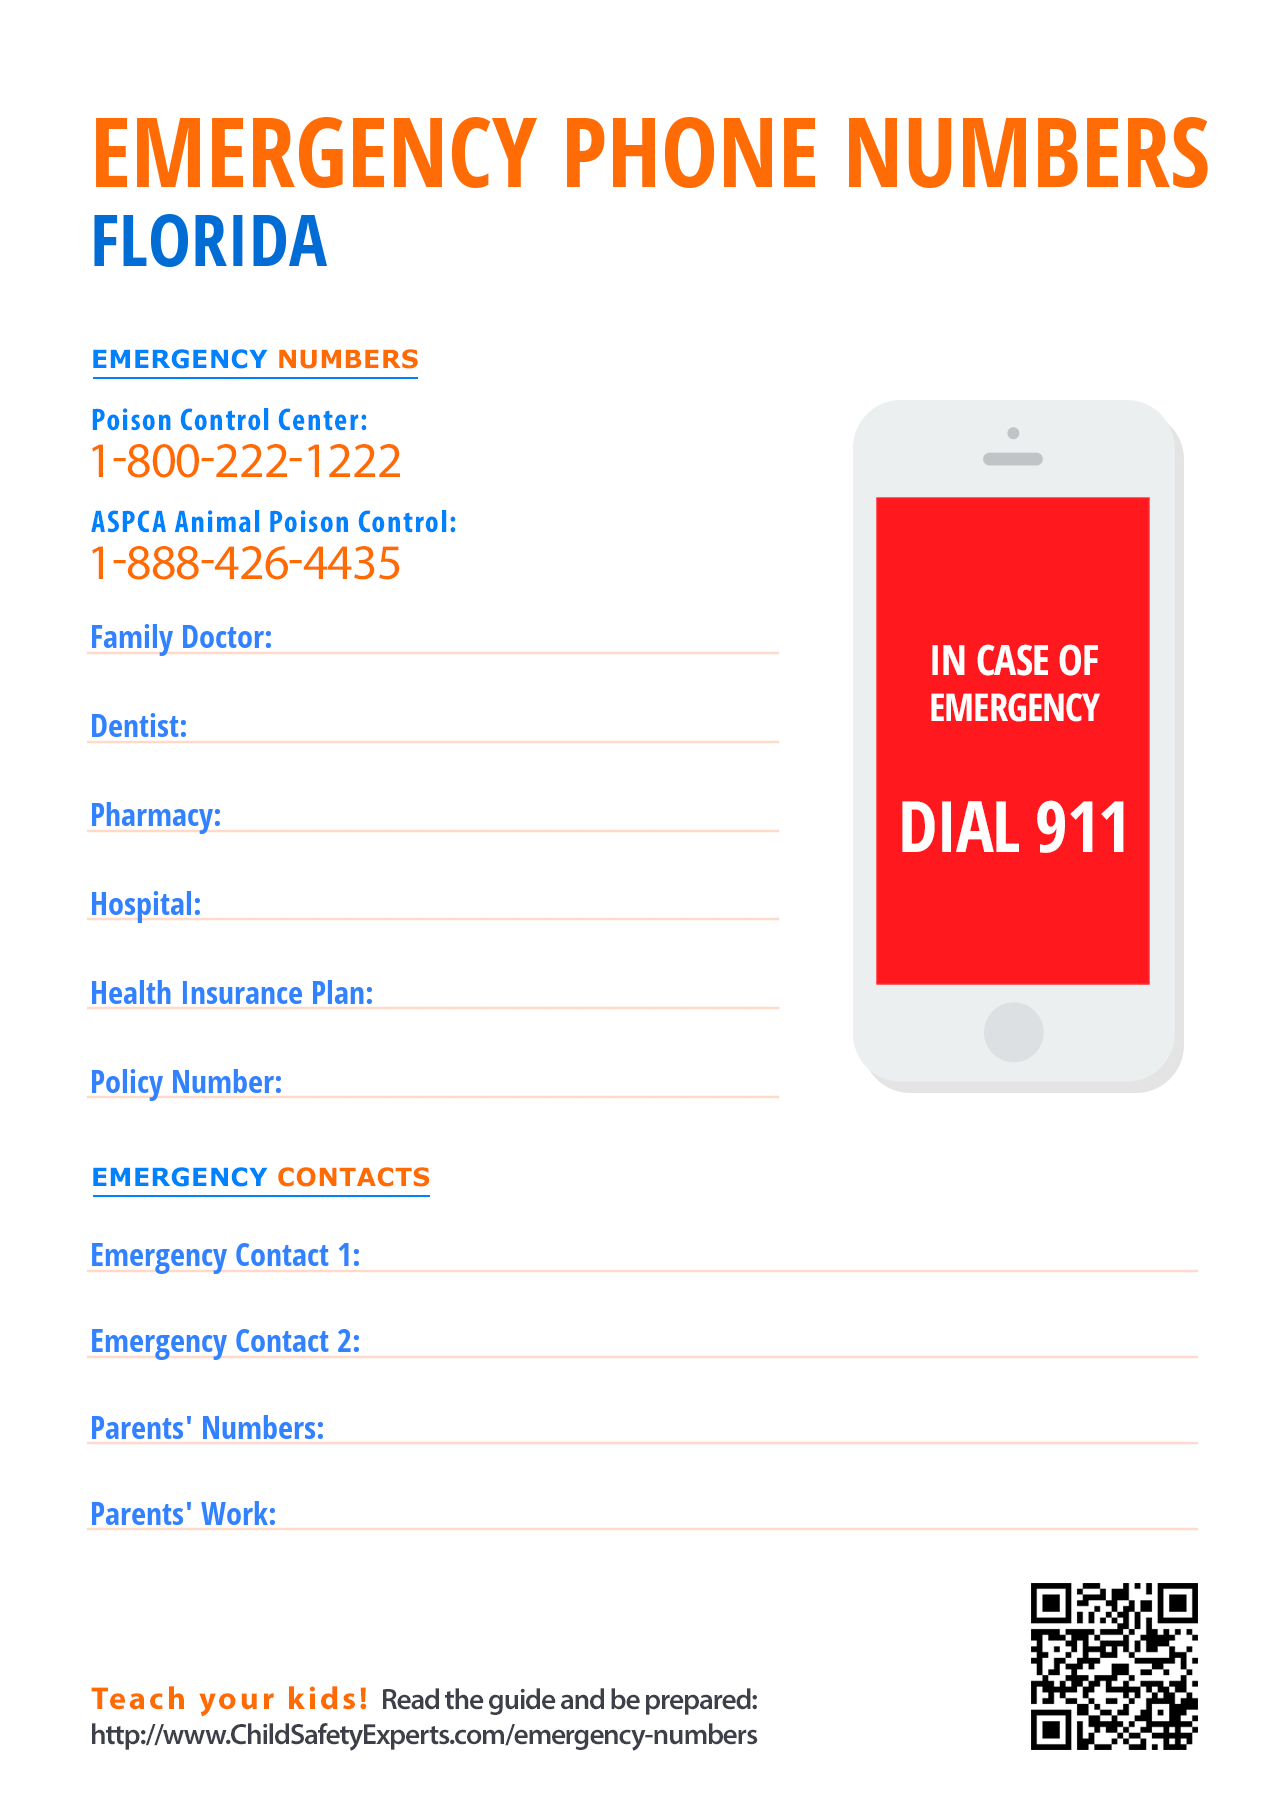 Important Emergency Phone Numbers - Print and hang on the fridge